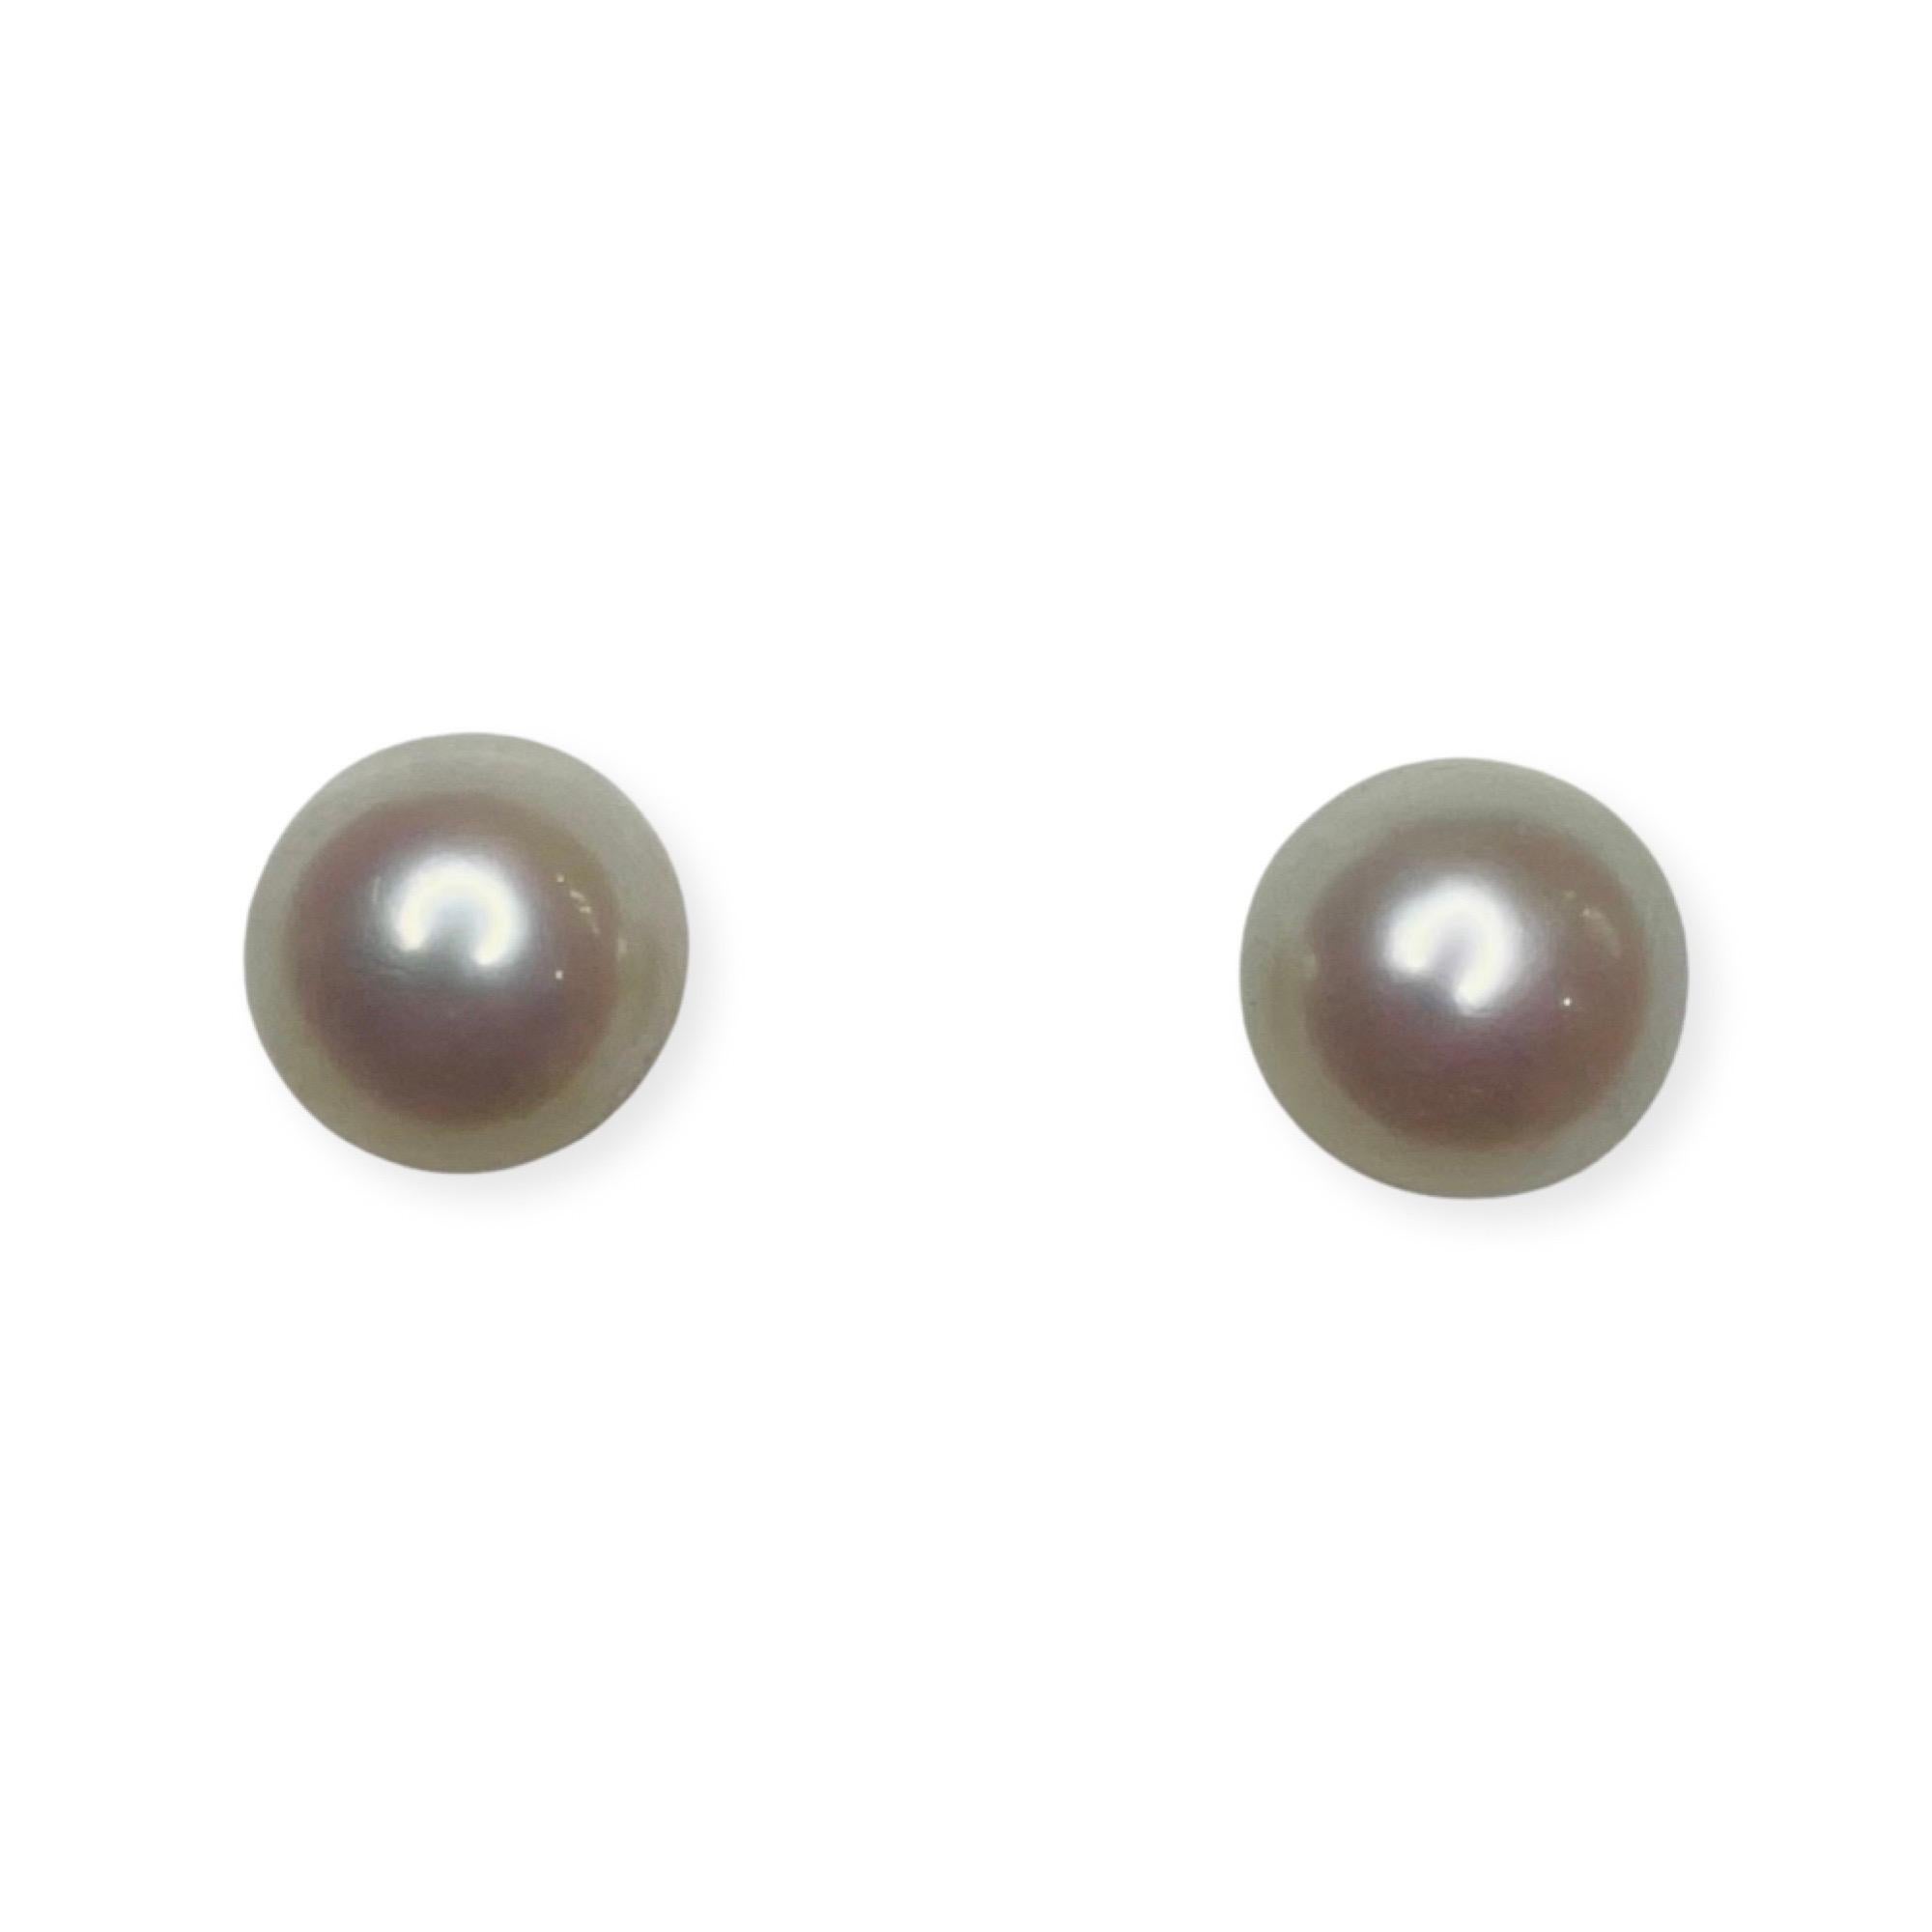 Tri Gem 18K White Gold Cultured White South Sea Pearl Earrings. The Pearls are 10.5 mm. The pearls are slightly off round with medium luster and slight blemishes. They come 14K gold backs imbedded in silicone. 400-30-797 